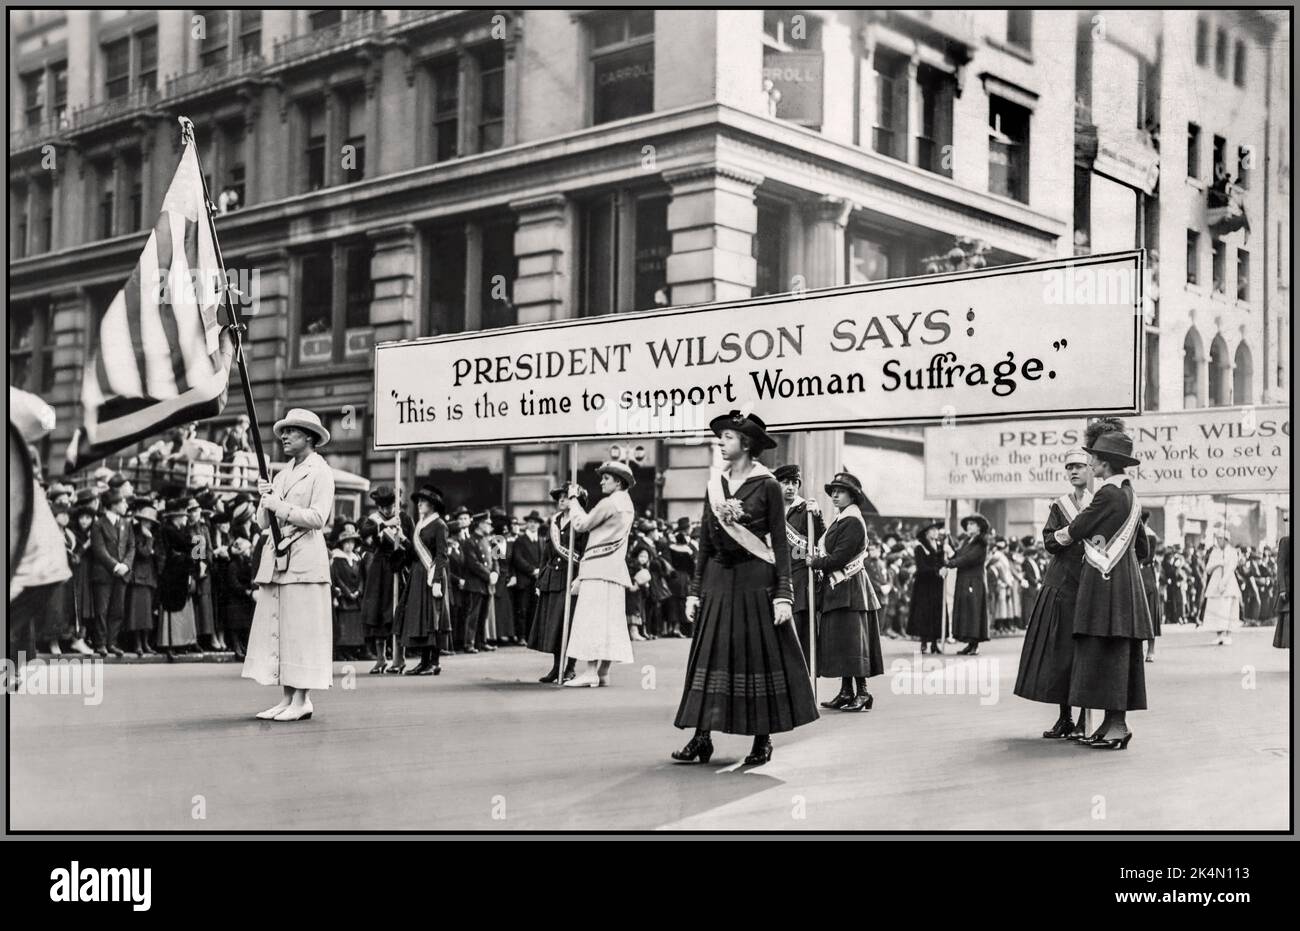 Womens Suffrage march demonstration 19th Amendment USA Banner with headline 'PRESIDENT WILSON SAYS... ' This is the Time to Support Woman Suffrage' America USA 1915 Stock Photo